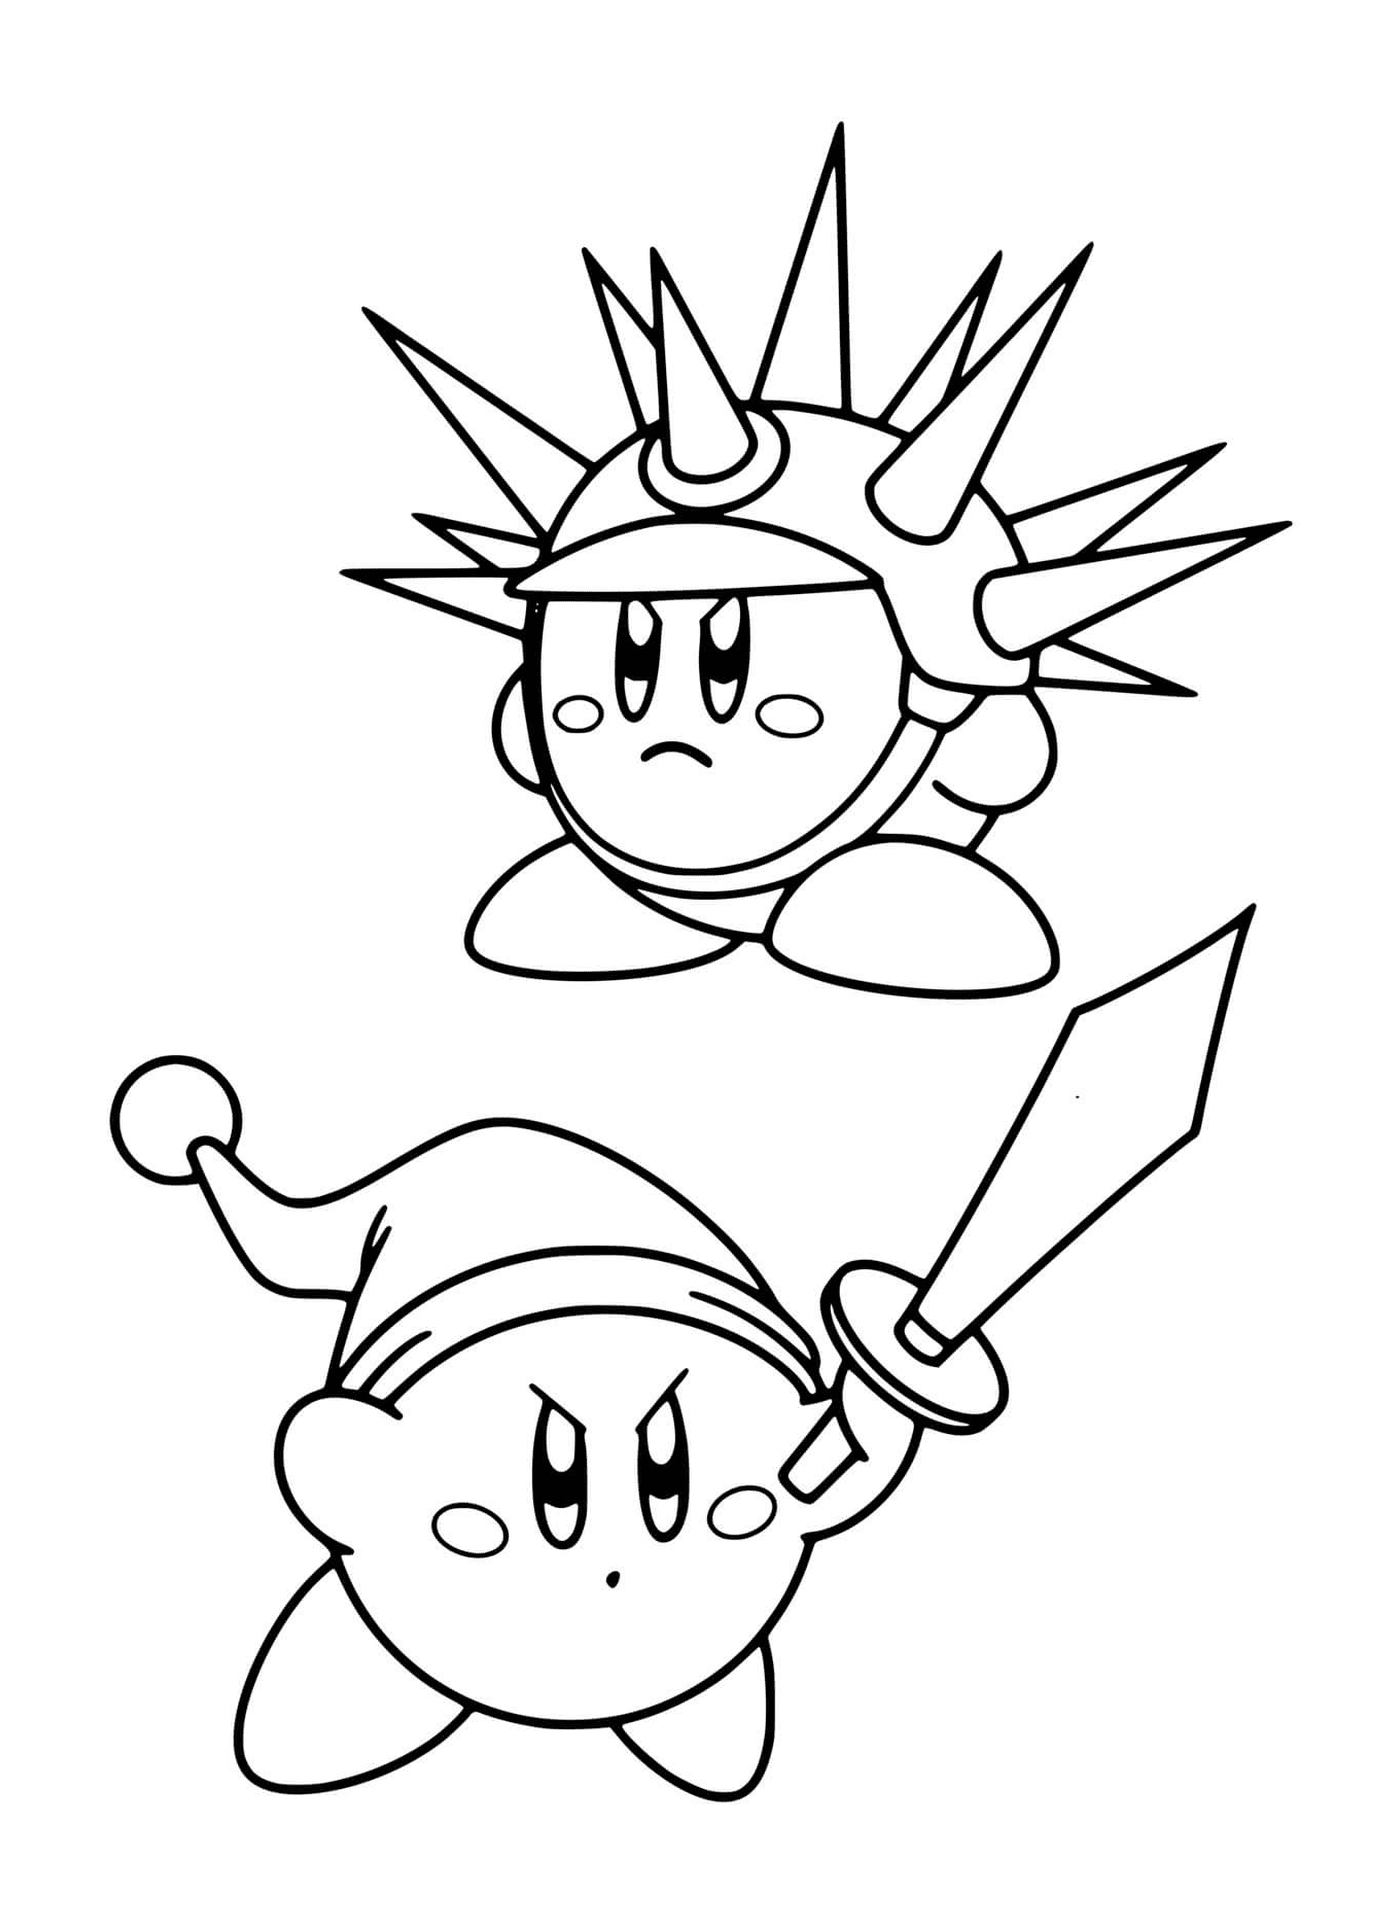  Dois personagens de Kirby Fighters 2 